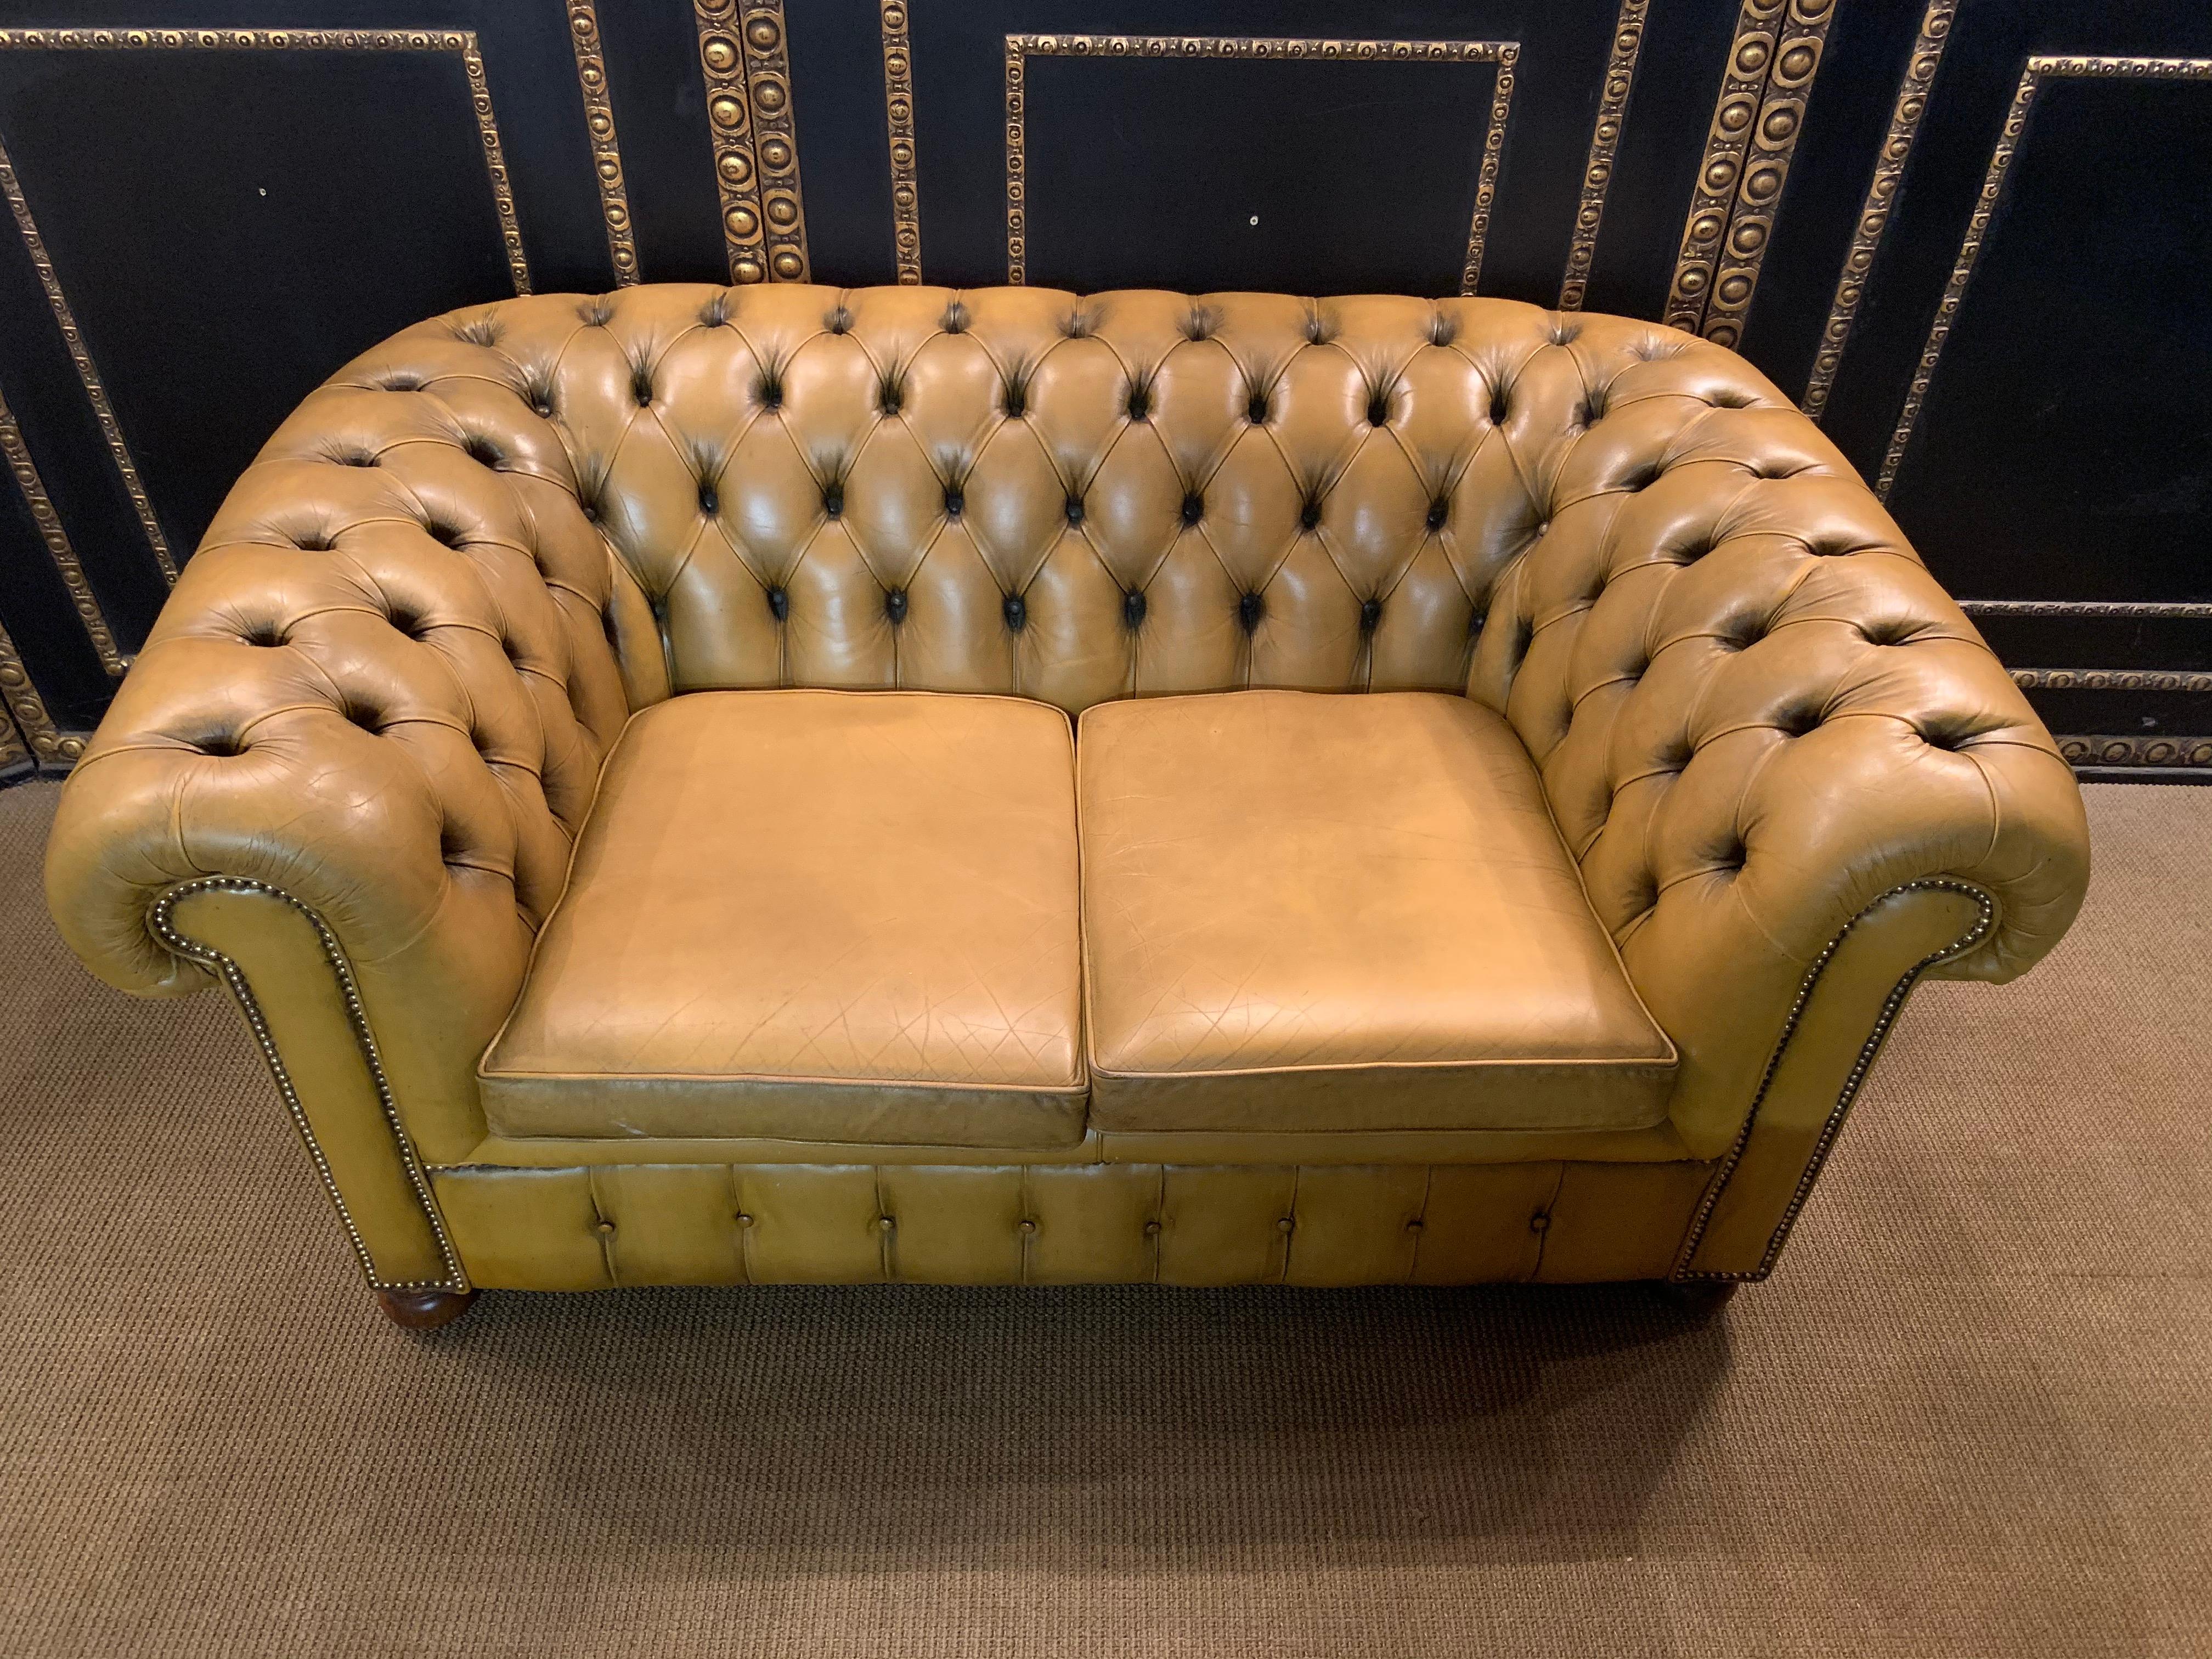 English Mustard Yellow original Leather Chesterfield Club Suite set Armchair and Sofa